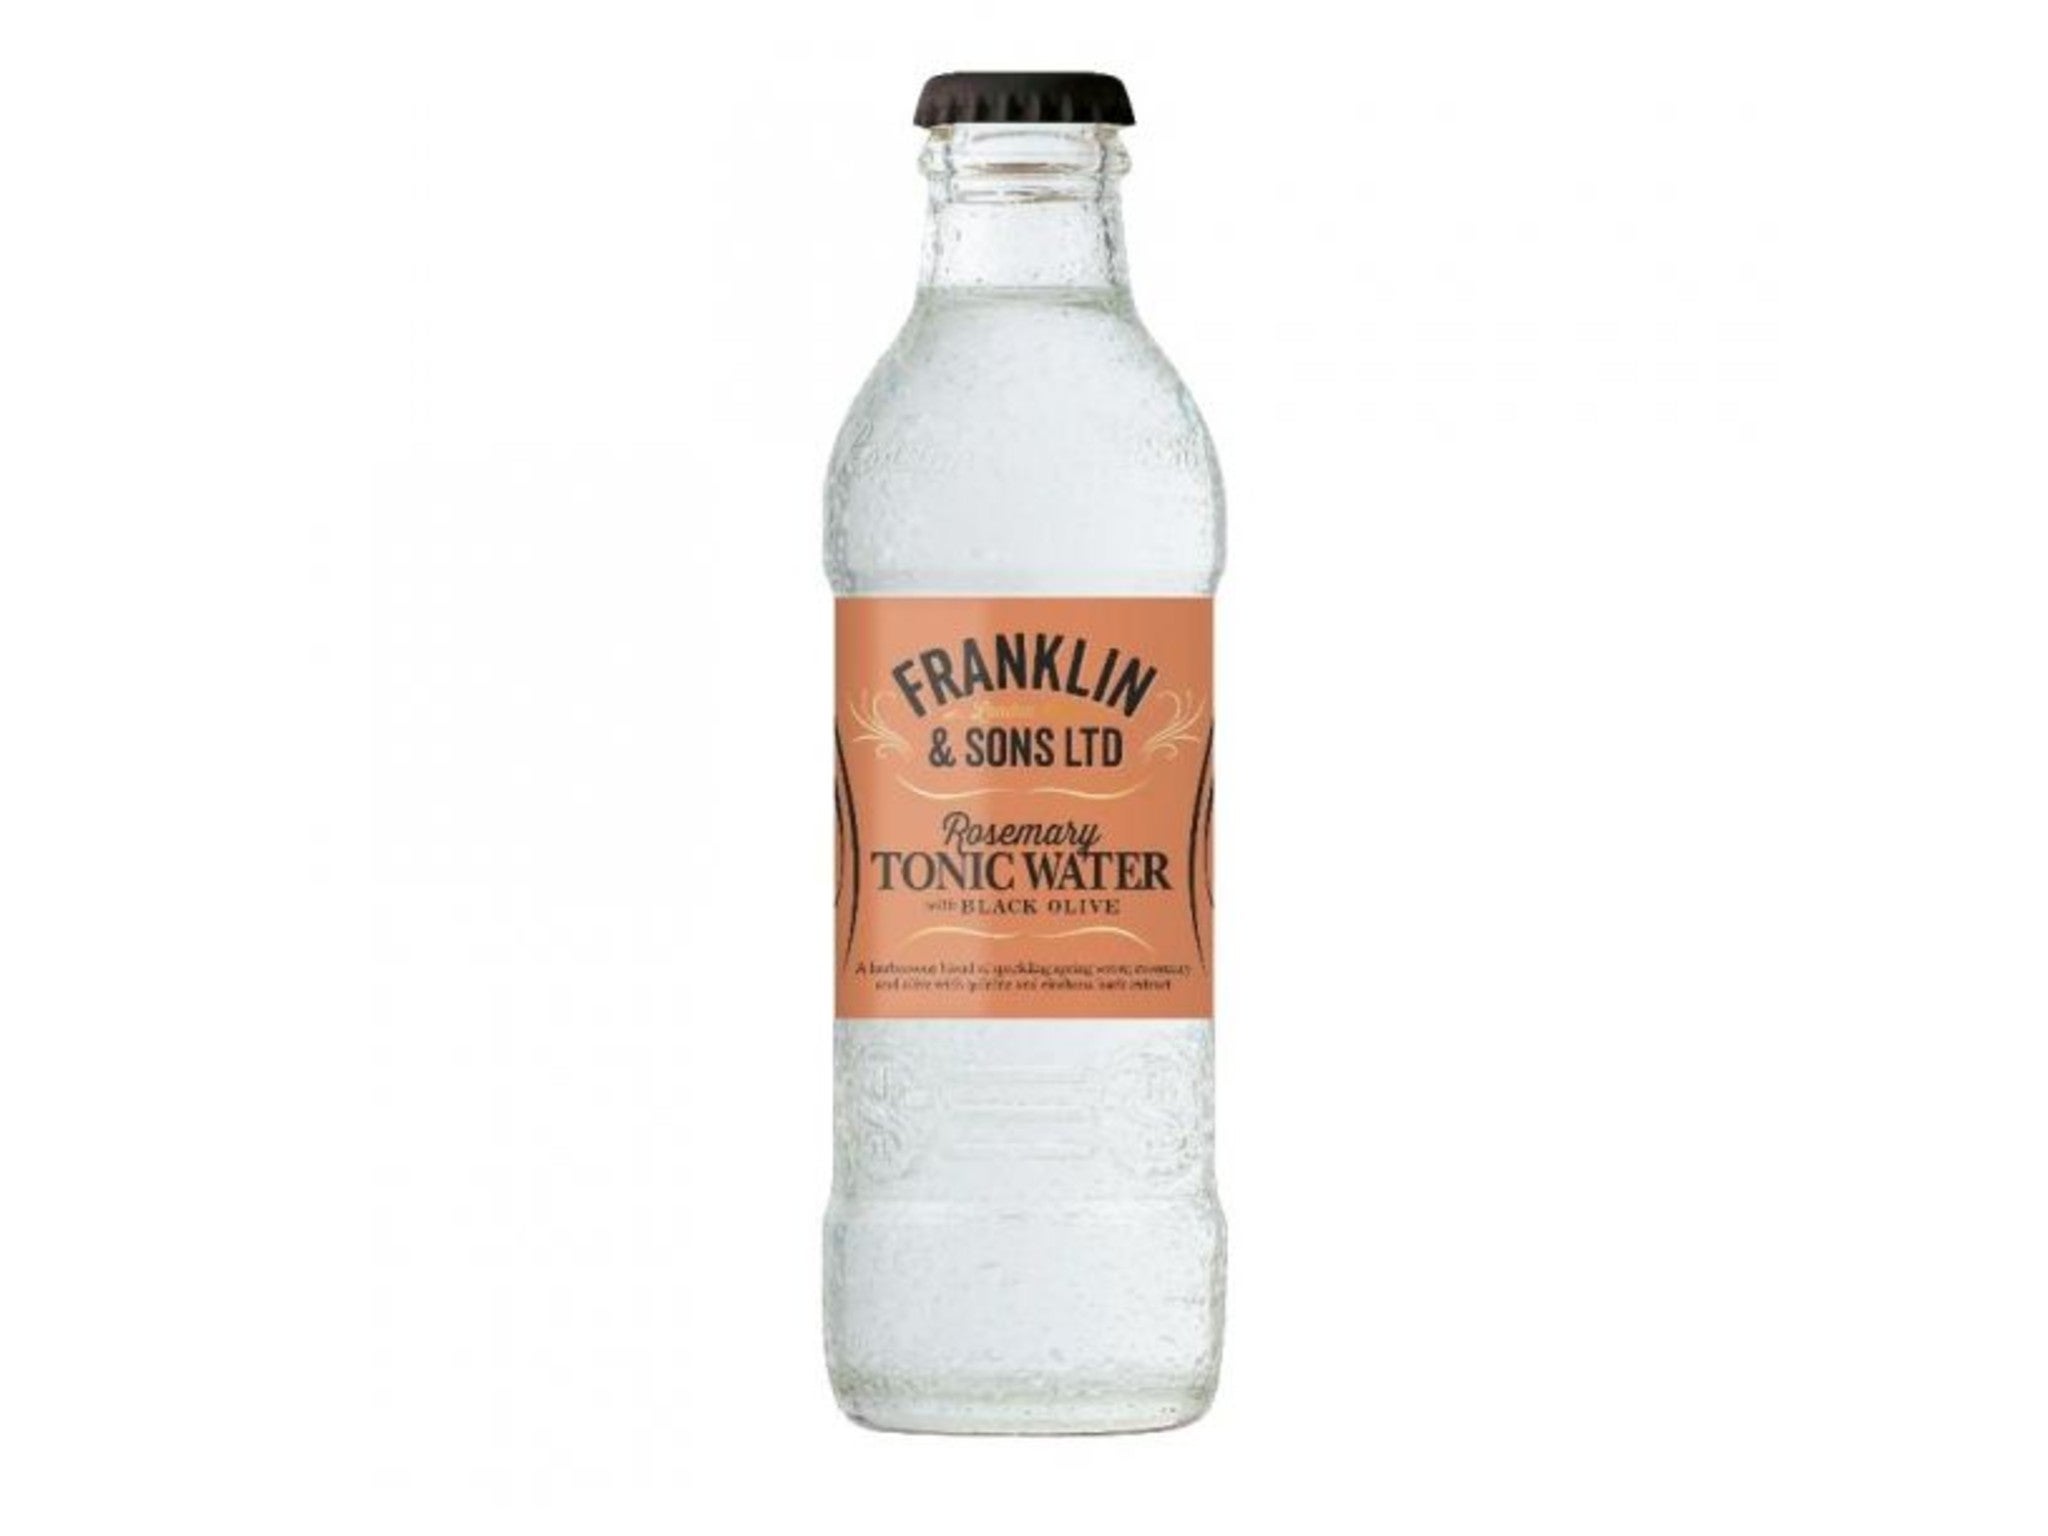 Franklin & Sons rosemary & black olive tonic water, 200ml x 24 indybest.jpeg